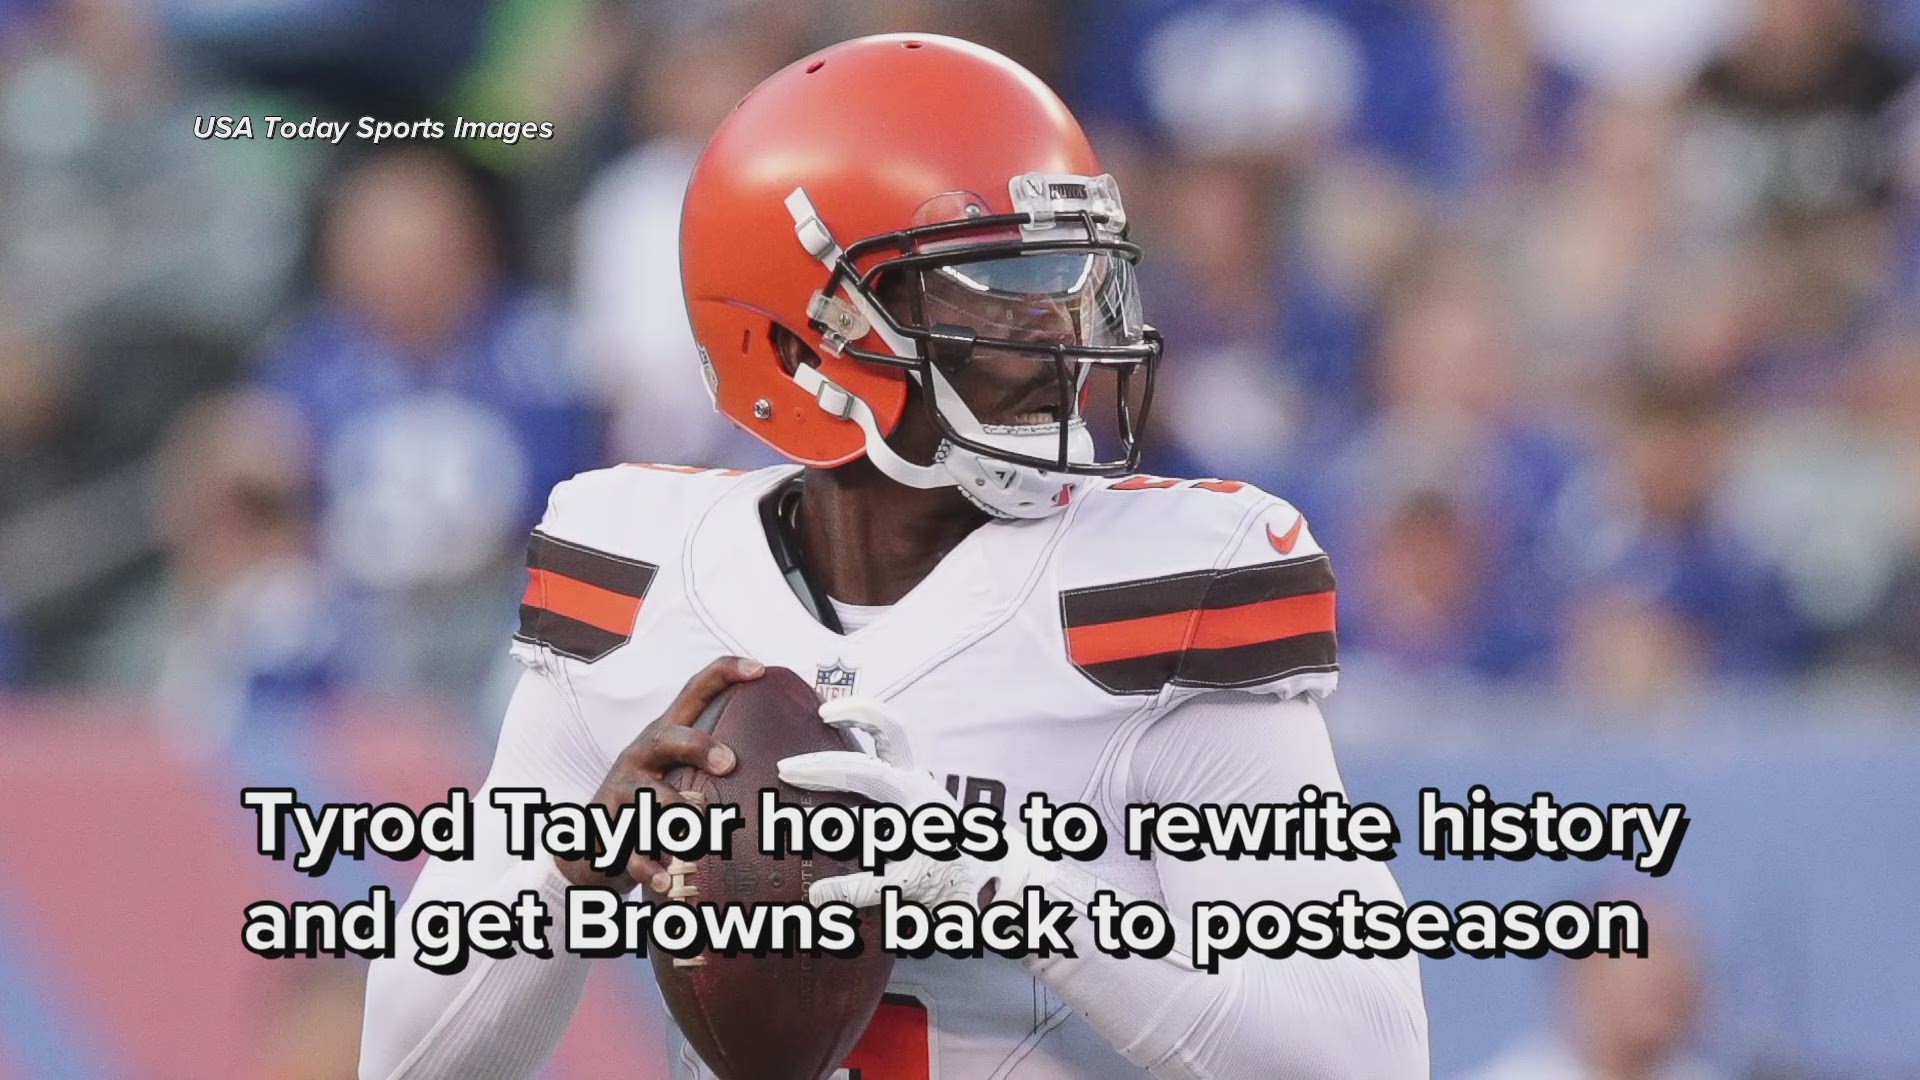 Tyrod Taylor hopes to rewrite history and get Cleveland Browns back to postseason